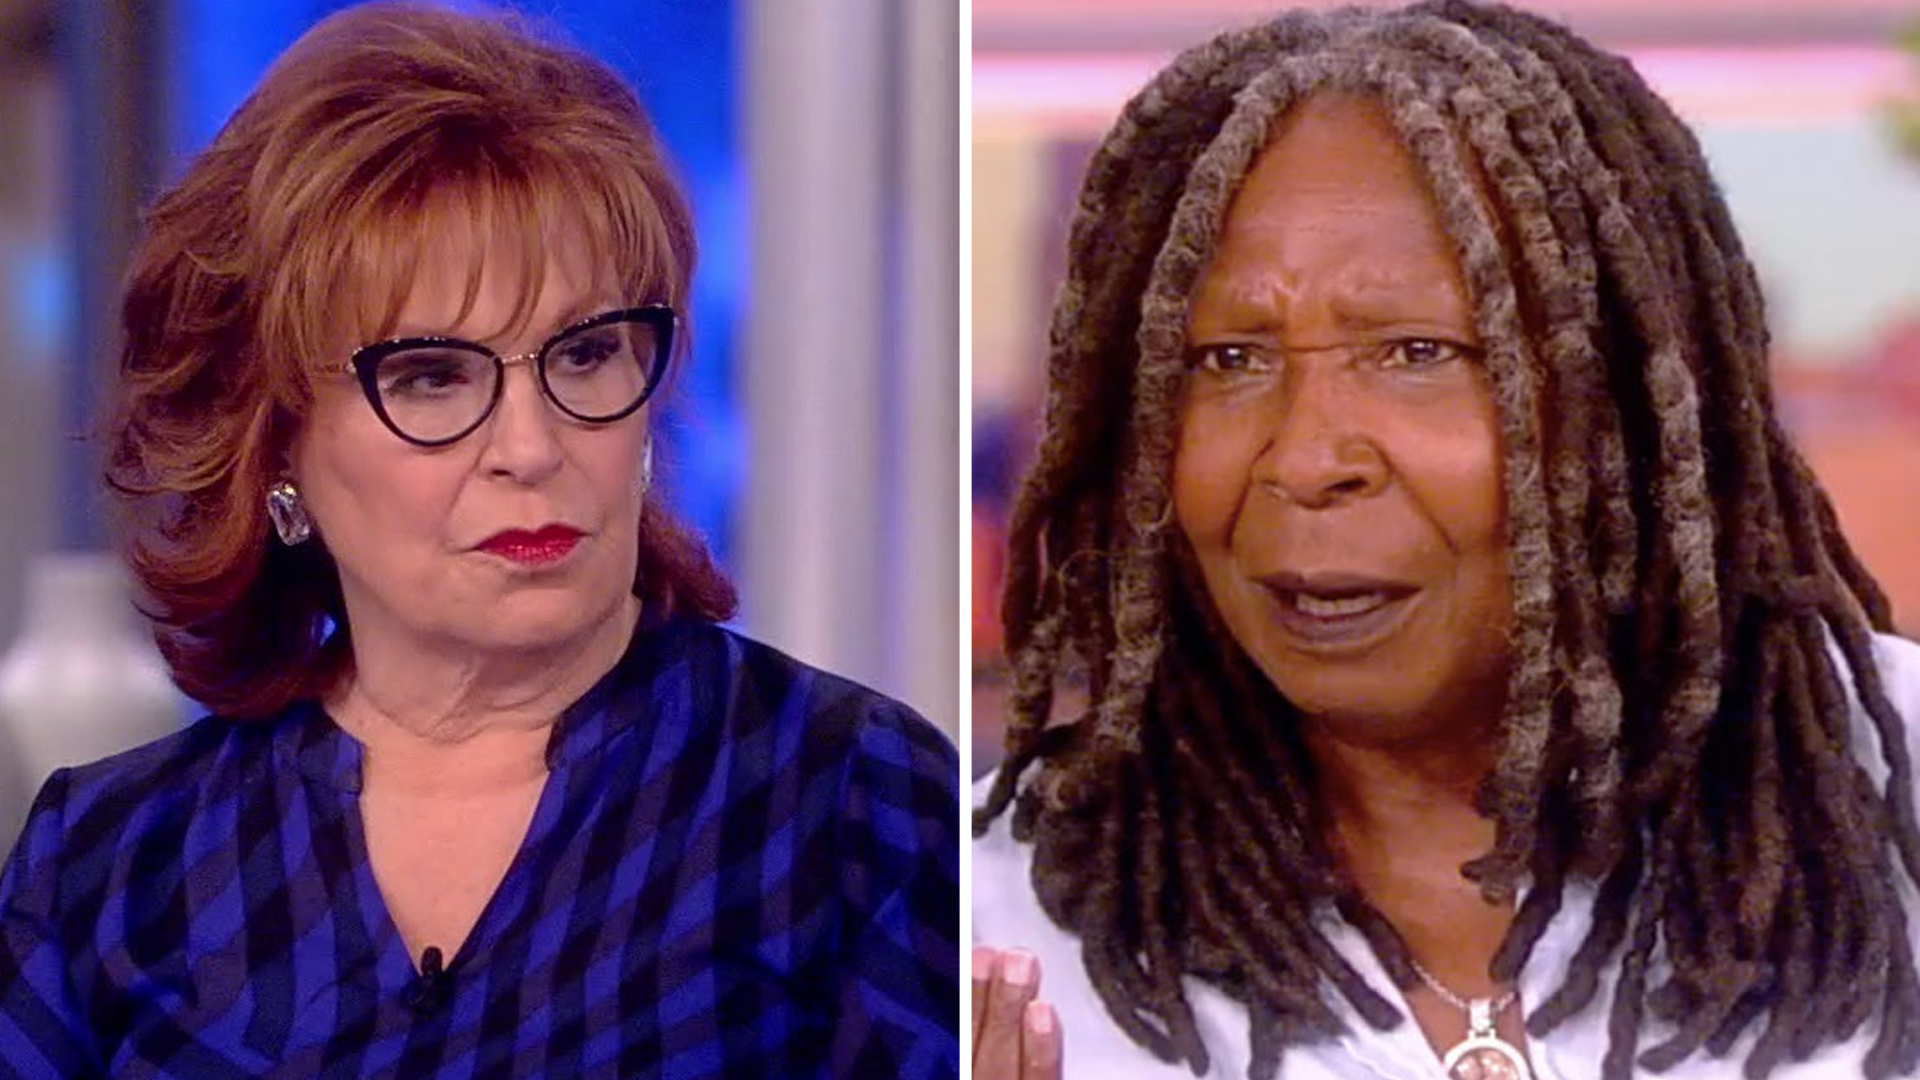 Breaking: ABC Refuses To Renew Whoopi And Joy's Contracts For 'The View,' 'No  More Toxic People In The Show'